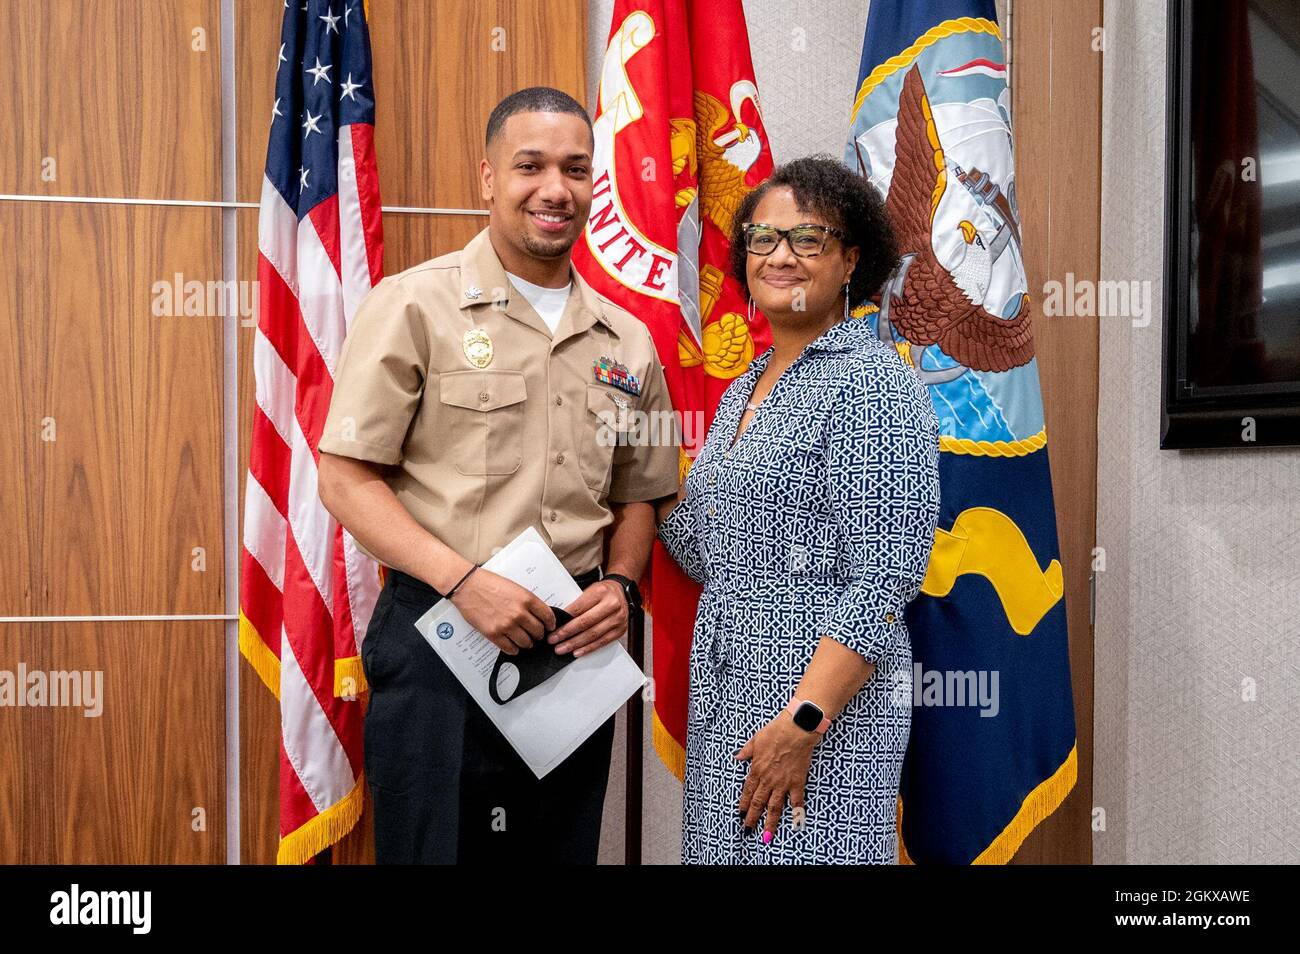 WASHINGTON, DC (July 16, 2021) – Master-at-Arms 2nd Class Najee Gravesande, left, poses with a family member following a frocking ceremony held onboard Washington Navy Yard. Stock Photo